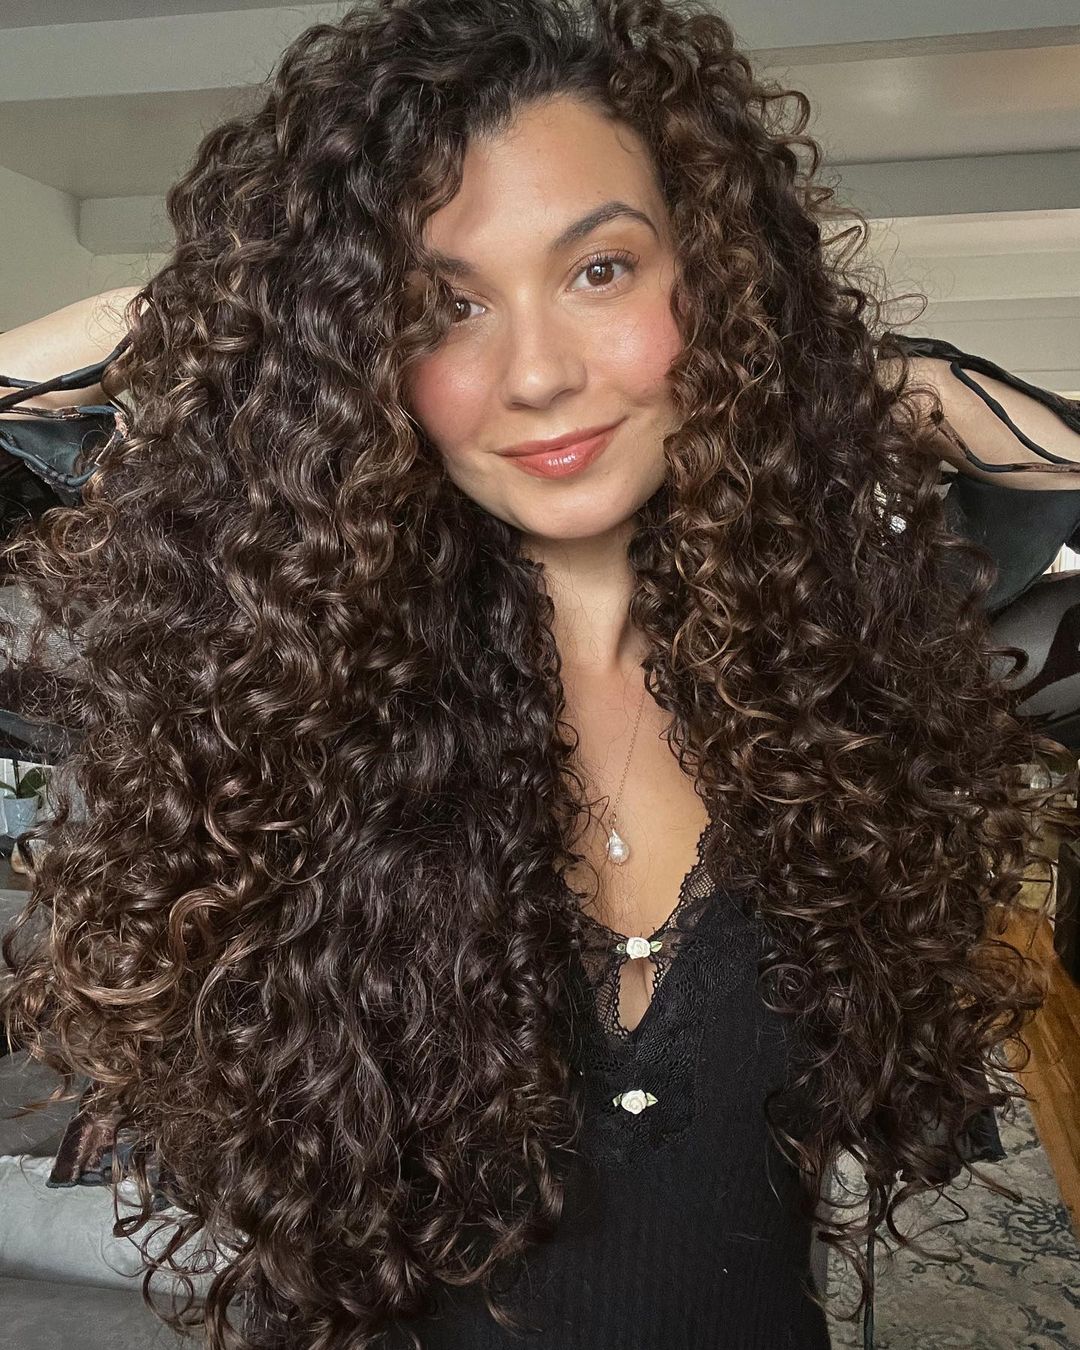 18 Photos Of 3a Hair For All The Curl Inspo 